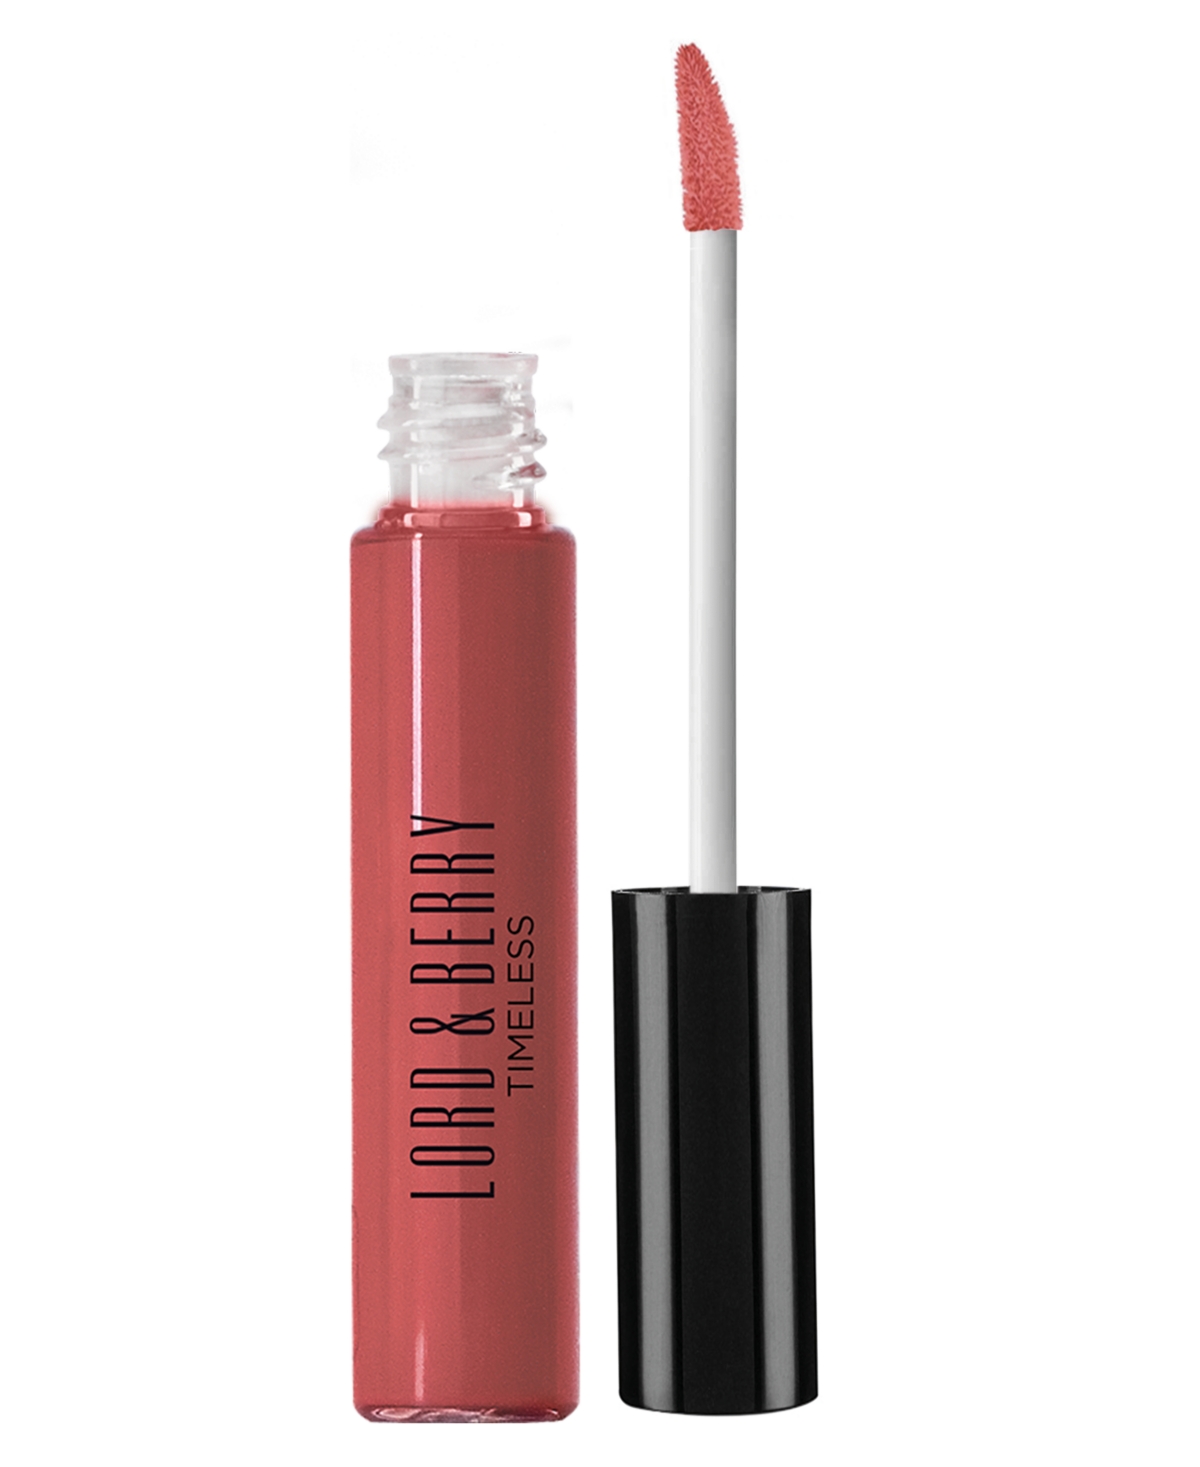 Lord & Berry Timeless Kissproof Lipstick